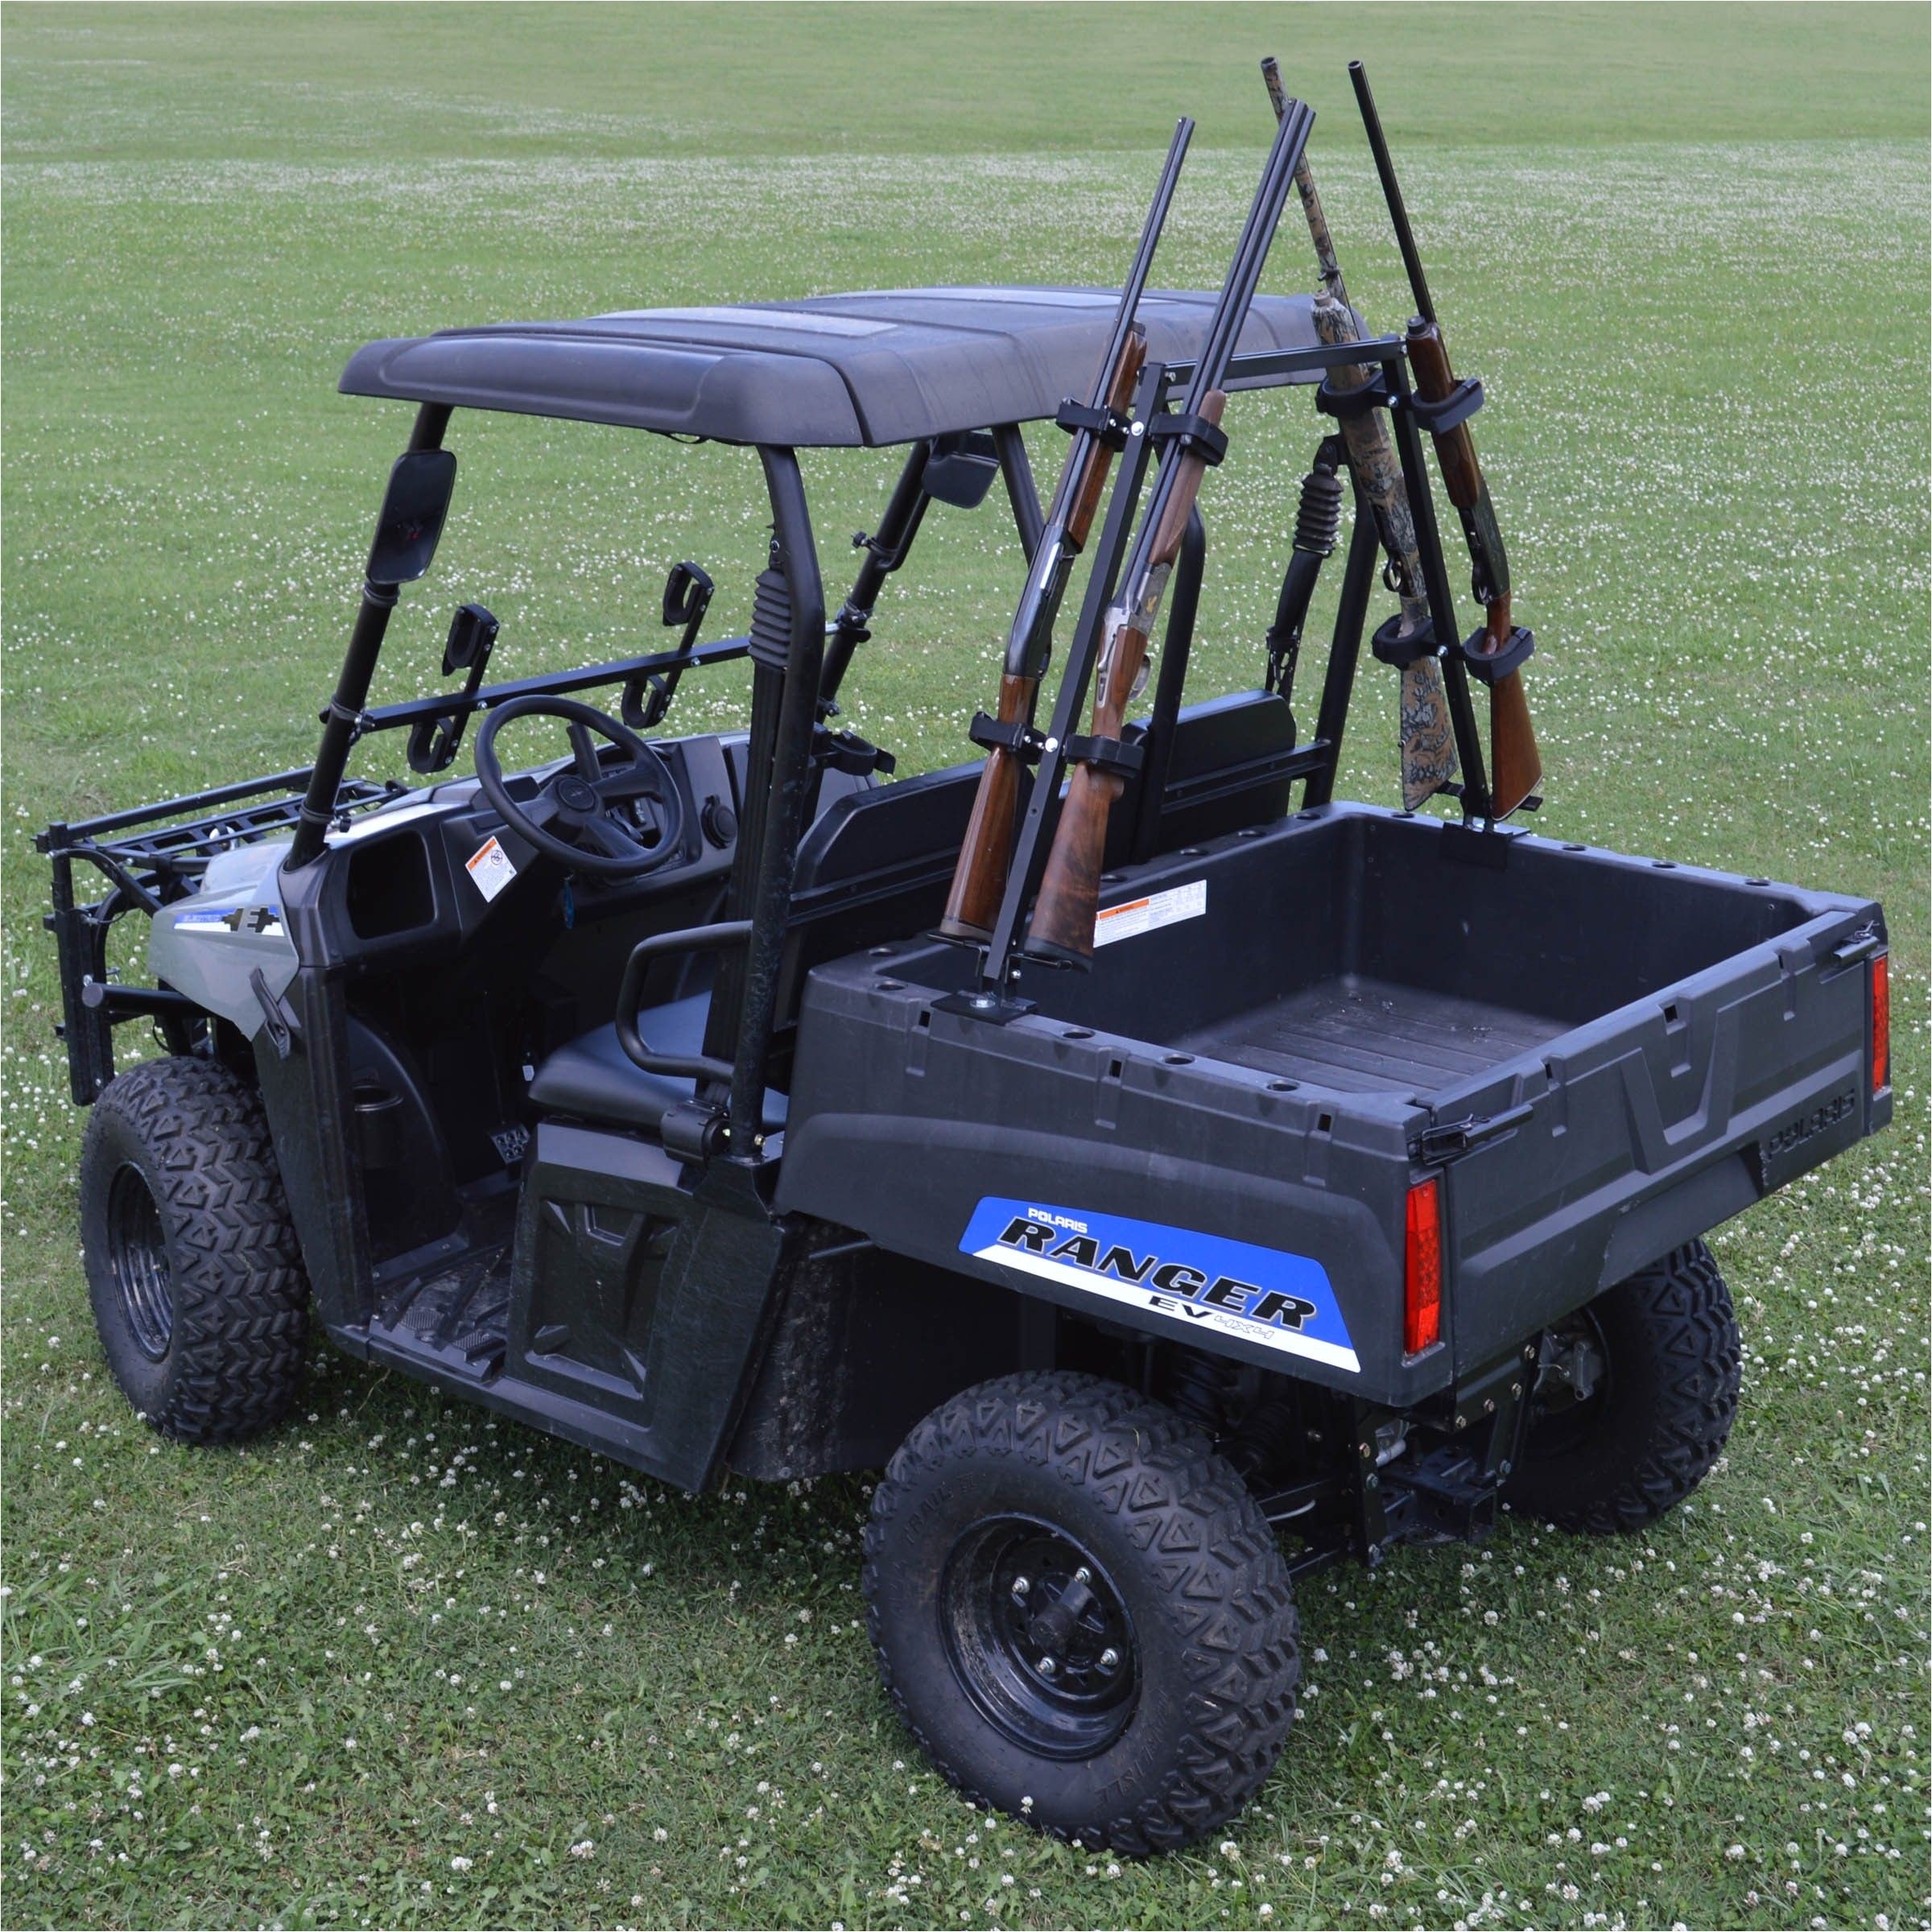 polaris ranger gun rack sporting clays by great day a zoom